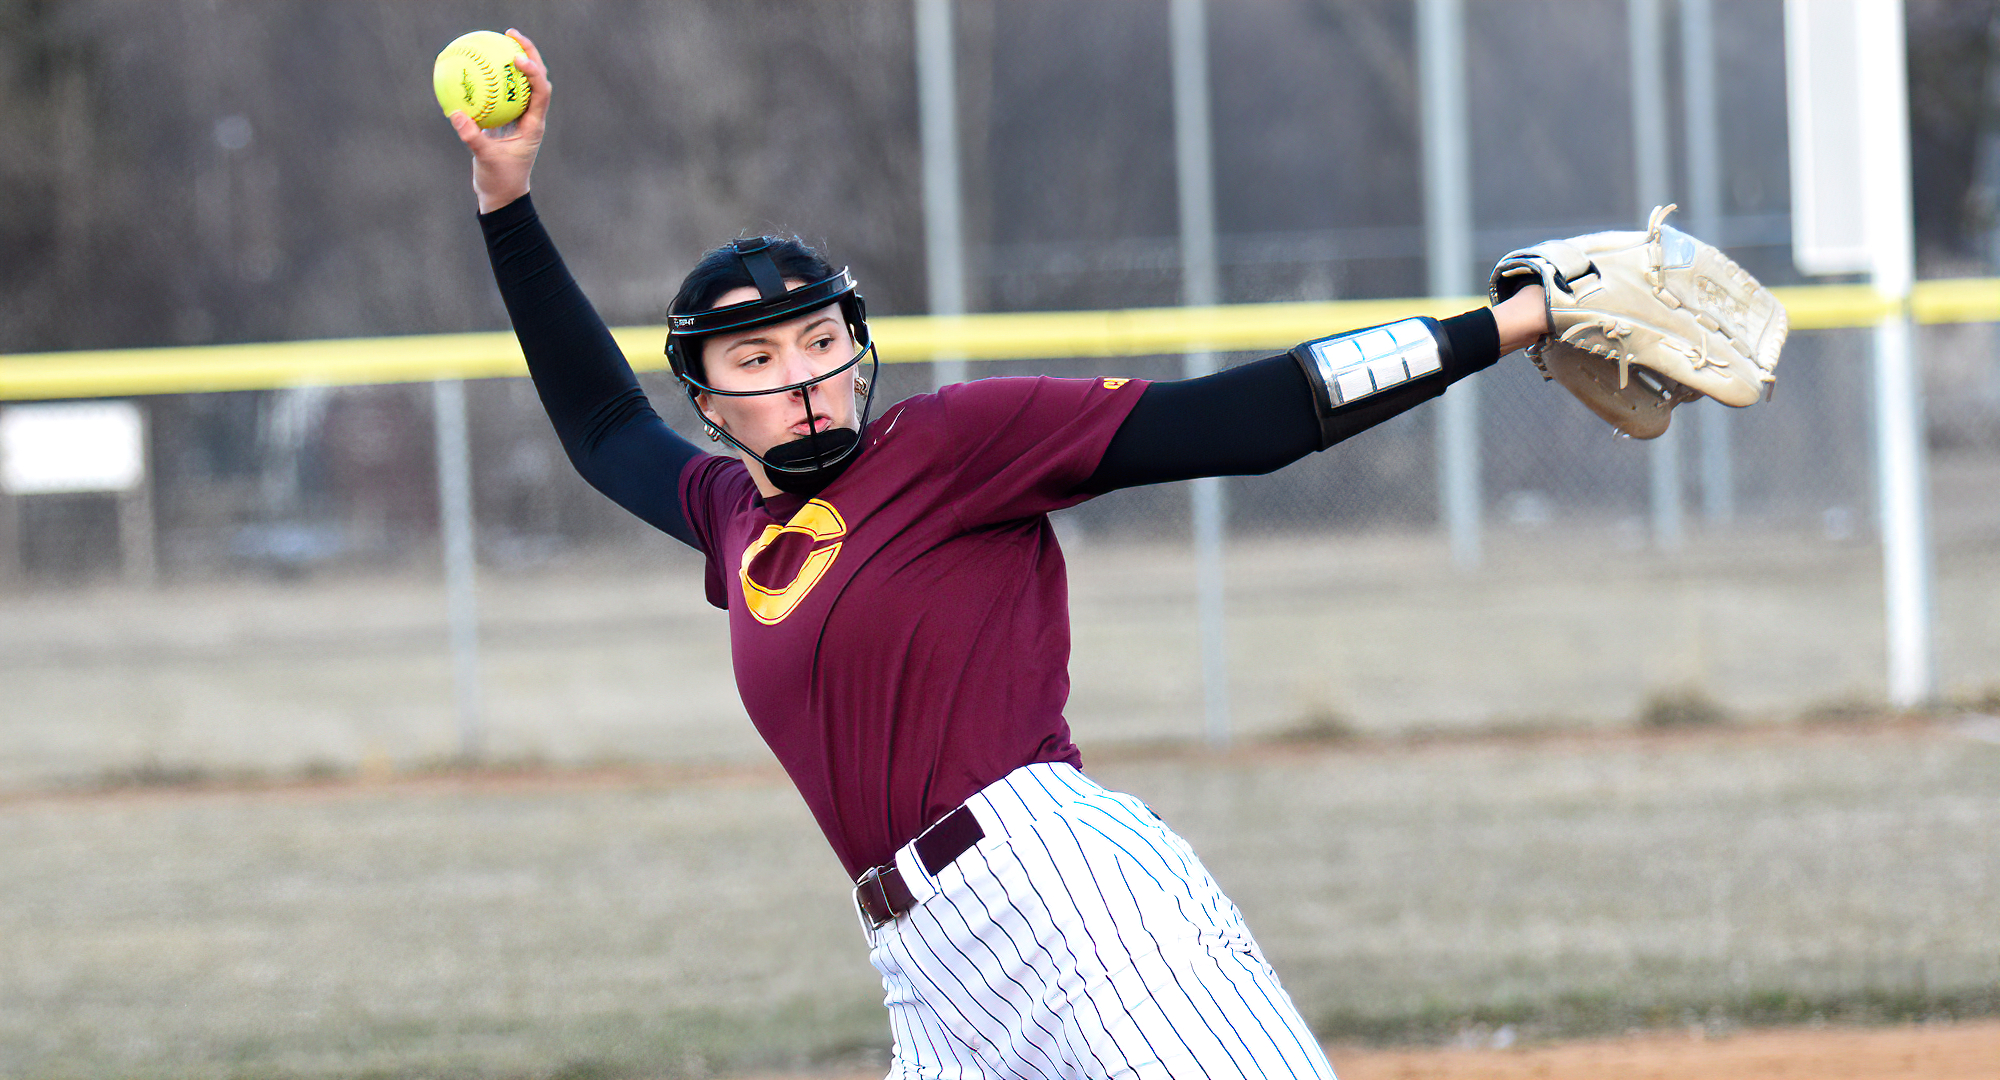 Sophomore Mallory Leitner pitched a 7-strikeout, complete-game shutout in the Cobbers' 5-0 win over Penn St Berks.